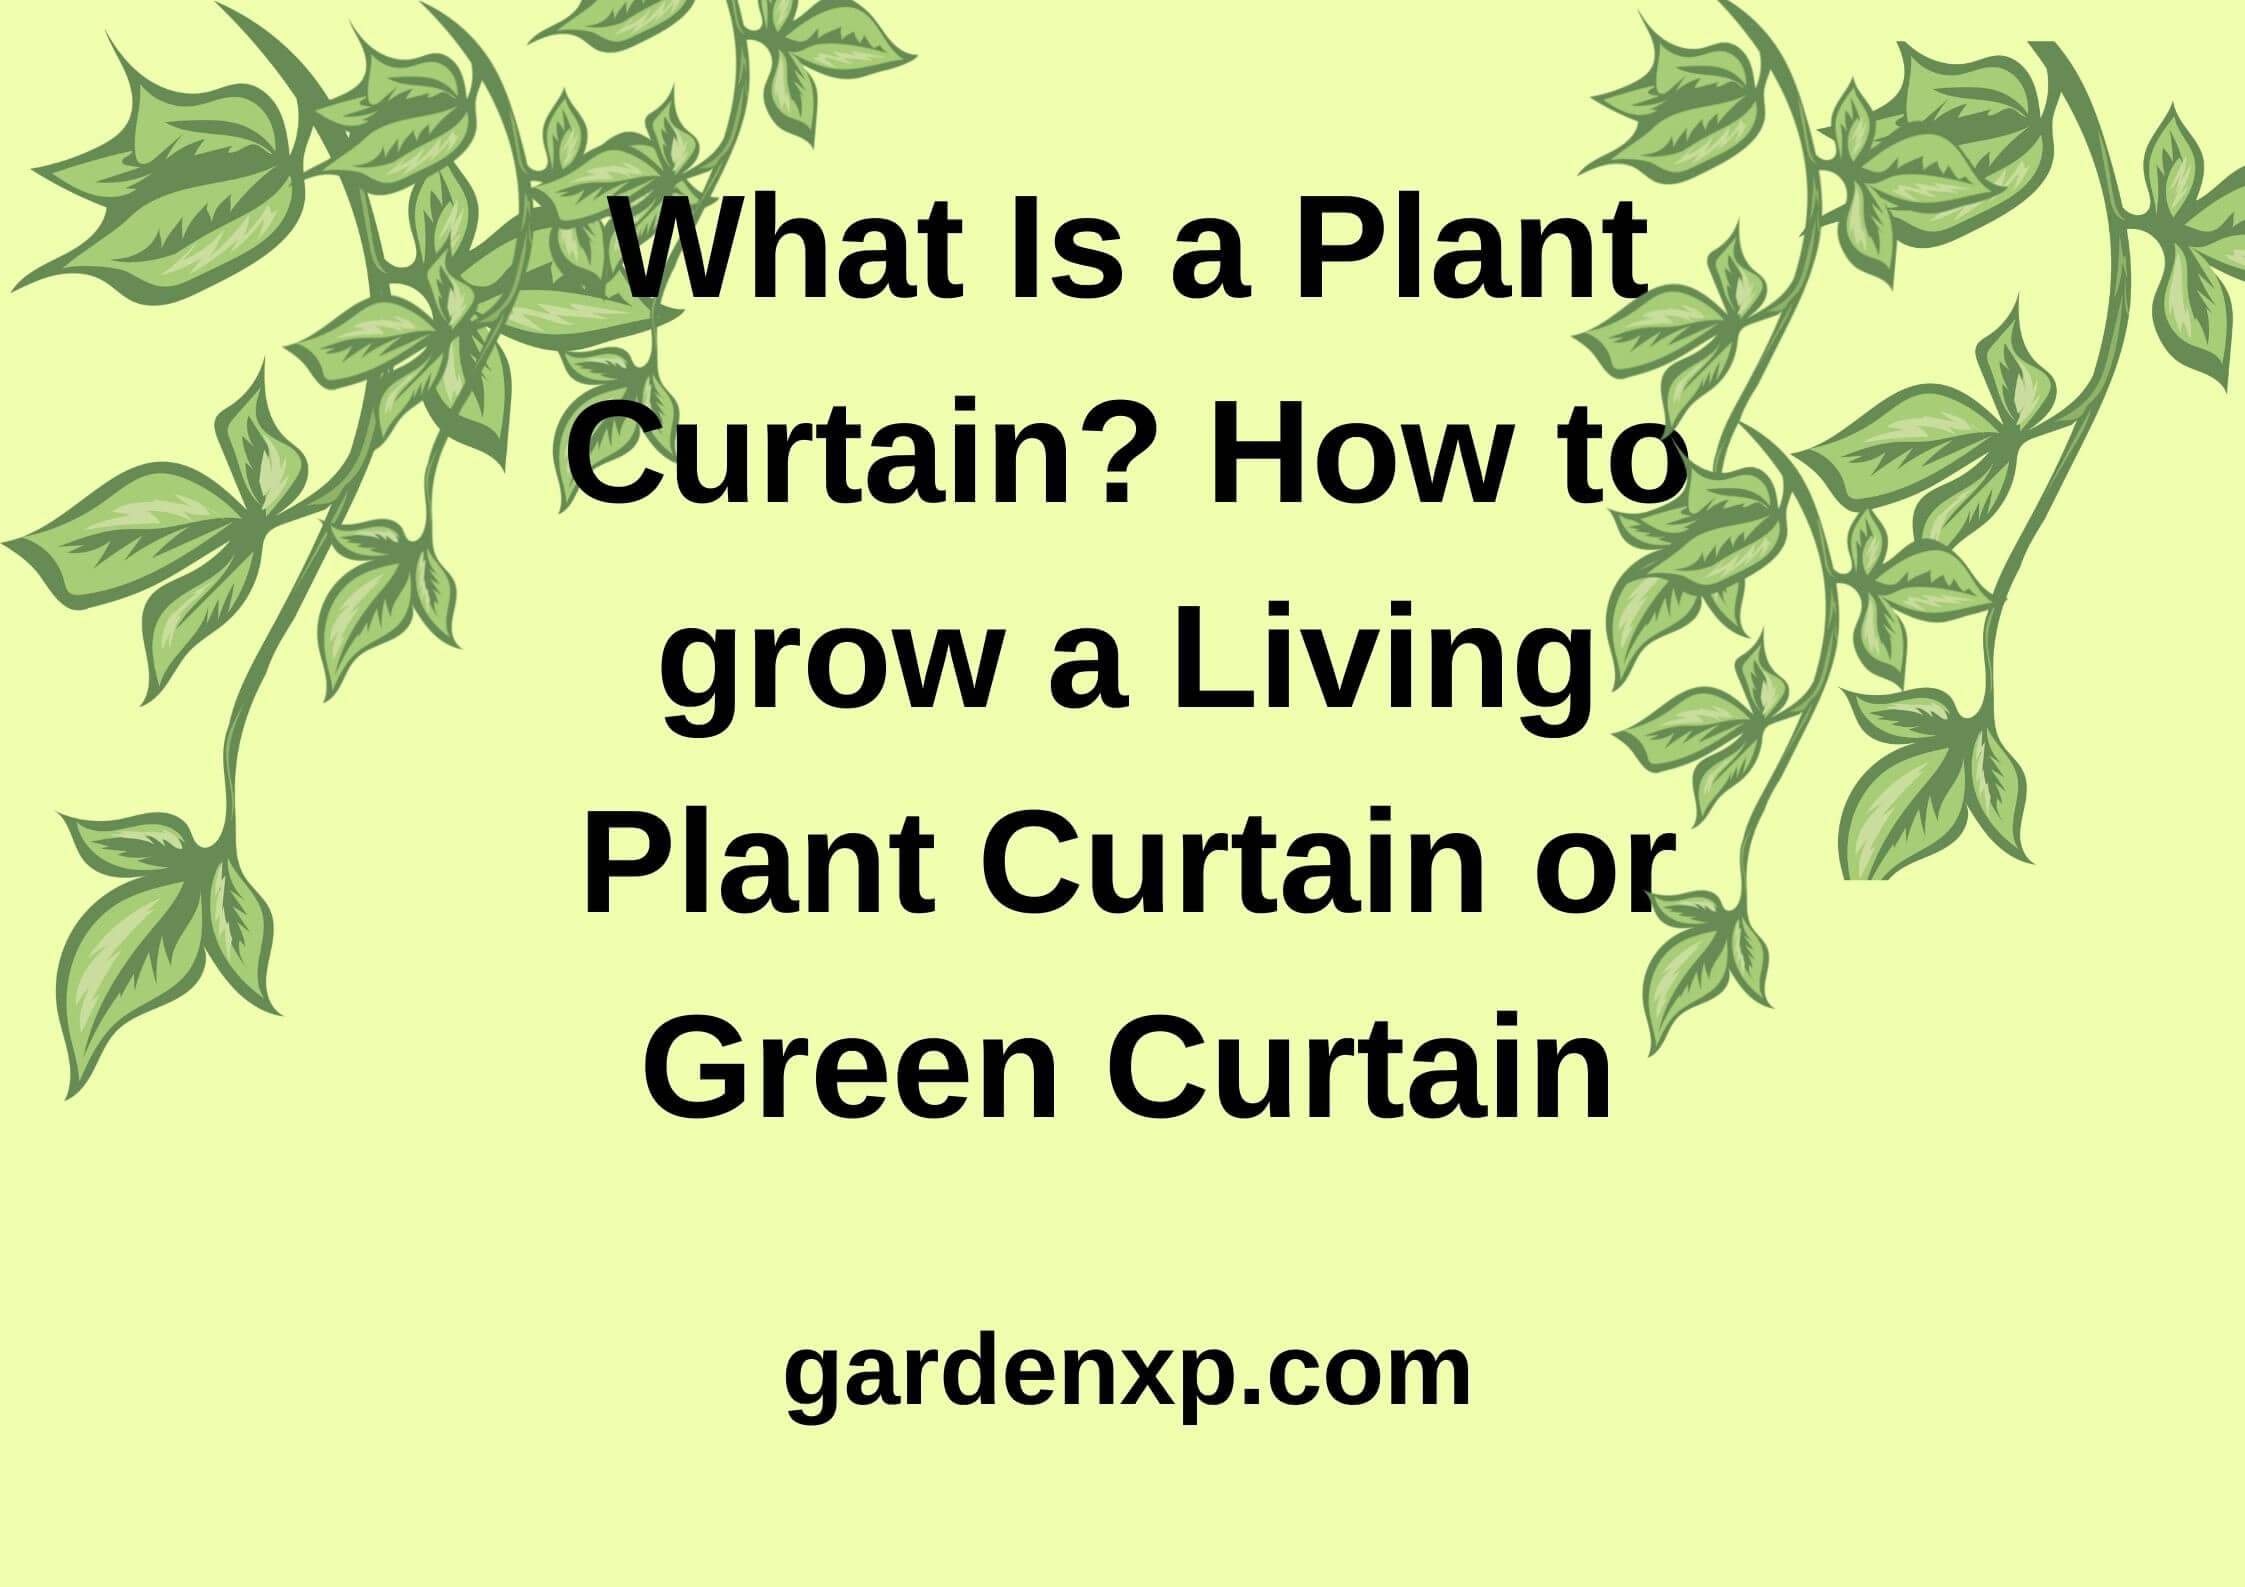 What Is a Plant Curtain? How to grow a Living Plant Curtain or Green Curtain